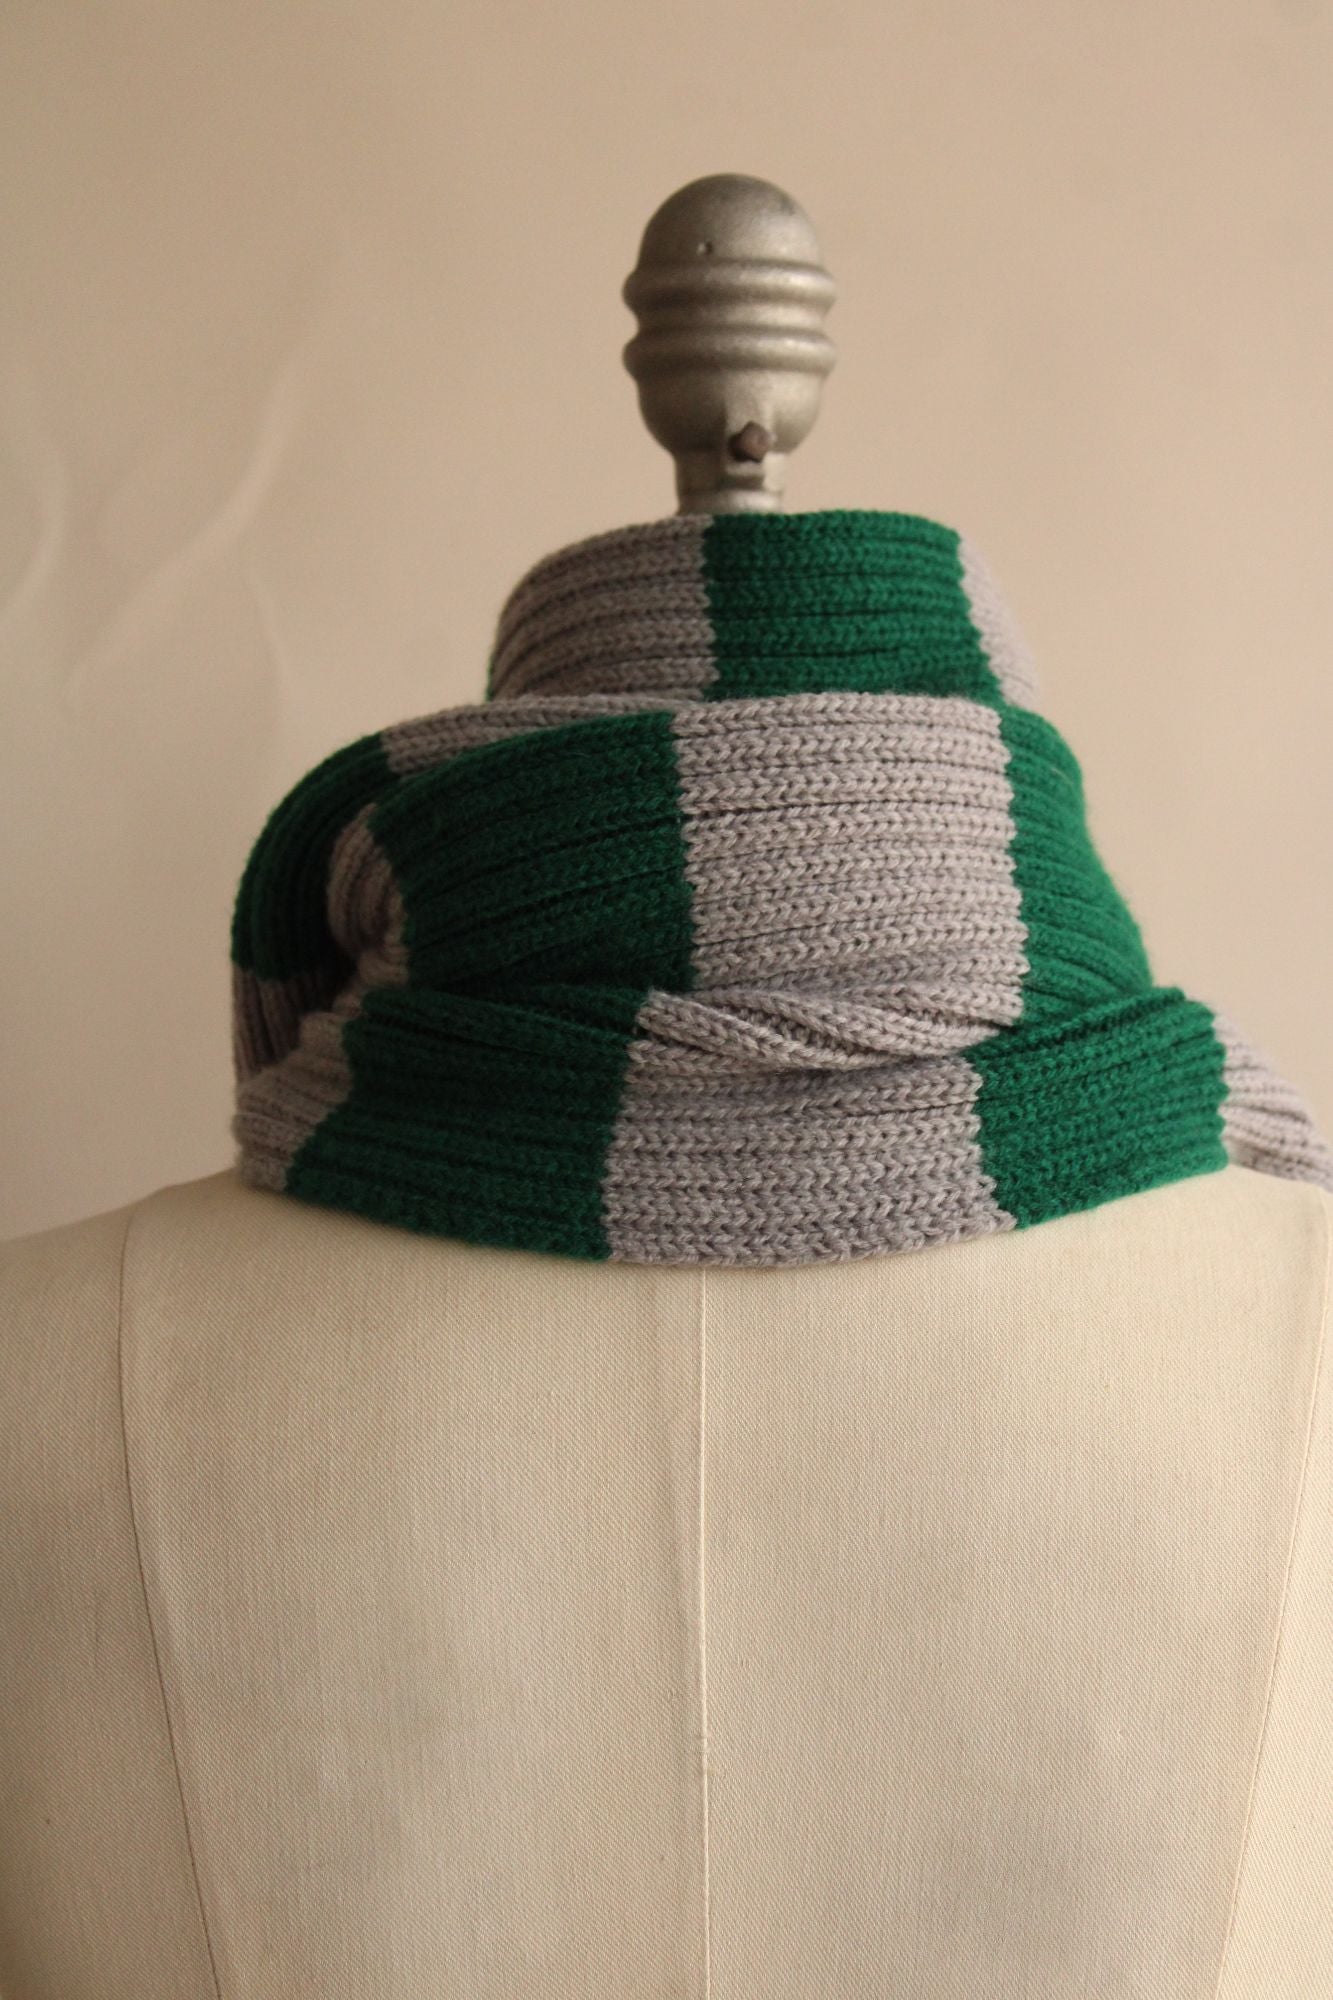 Harry Potter Slytherin Scarf, Unisex, Knit, Green and Gray, Hogwarts Houses